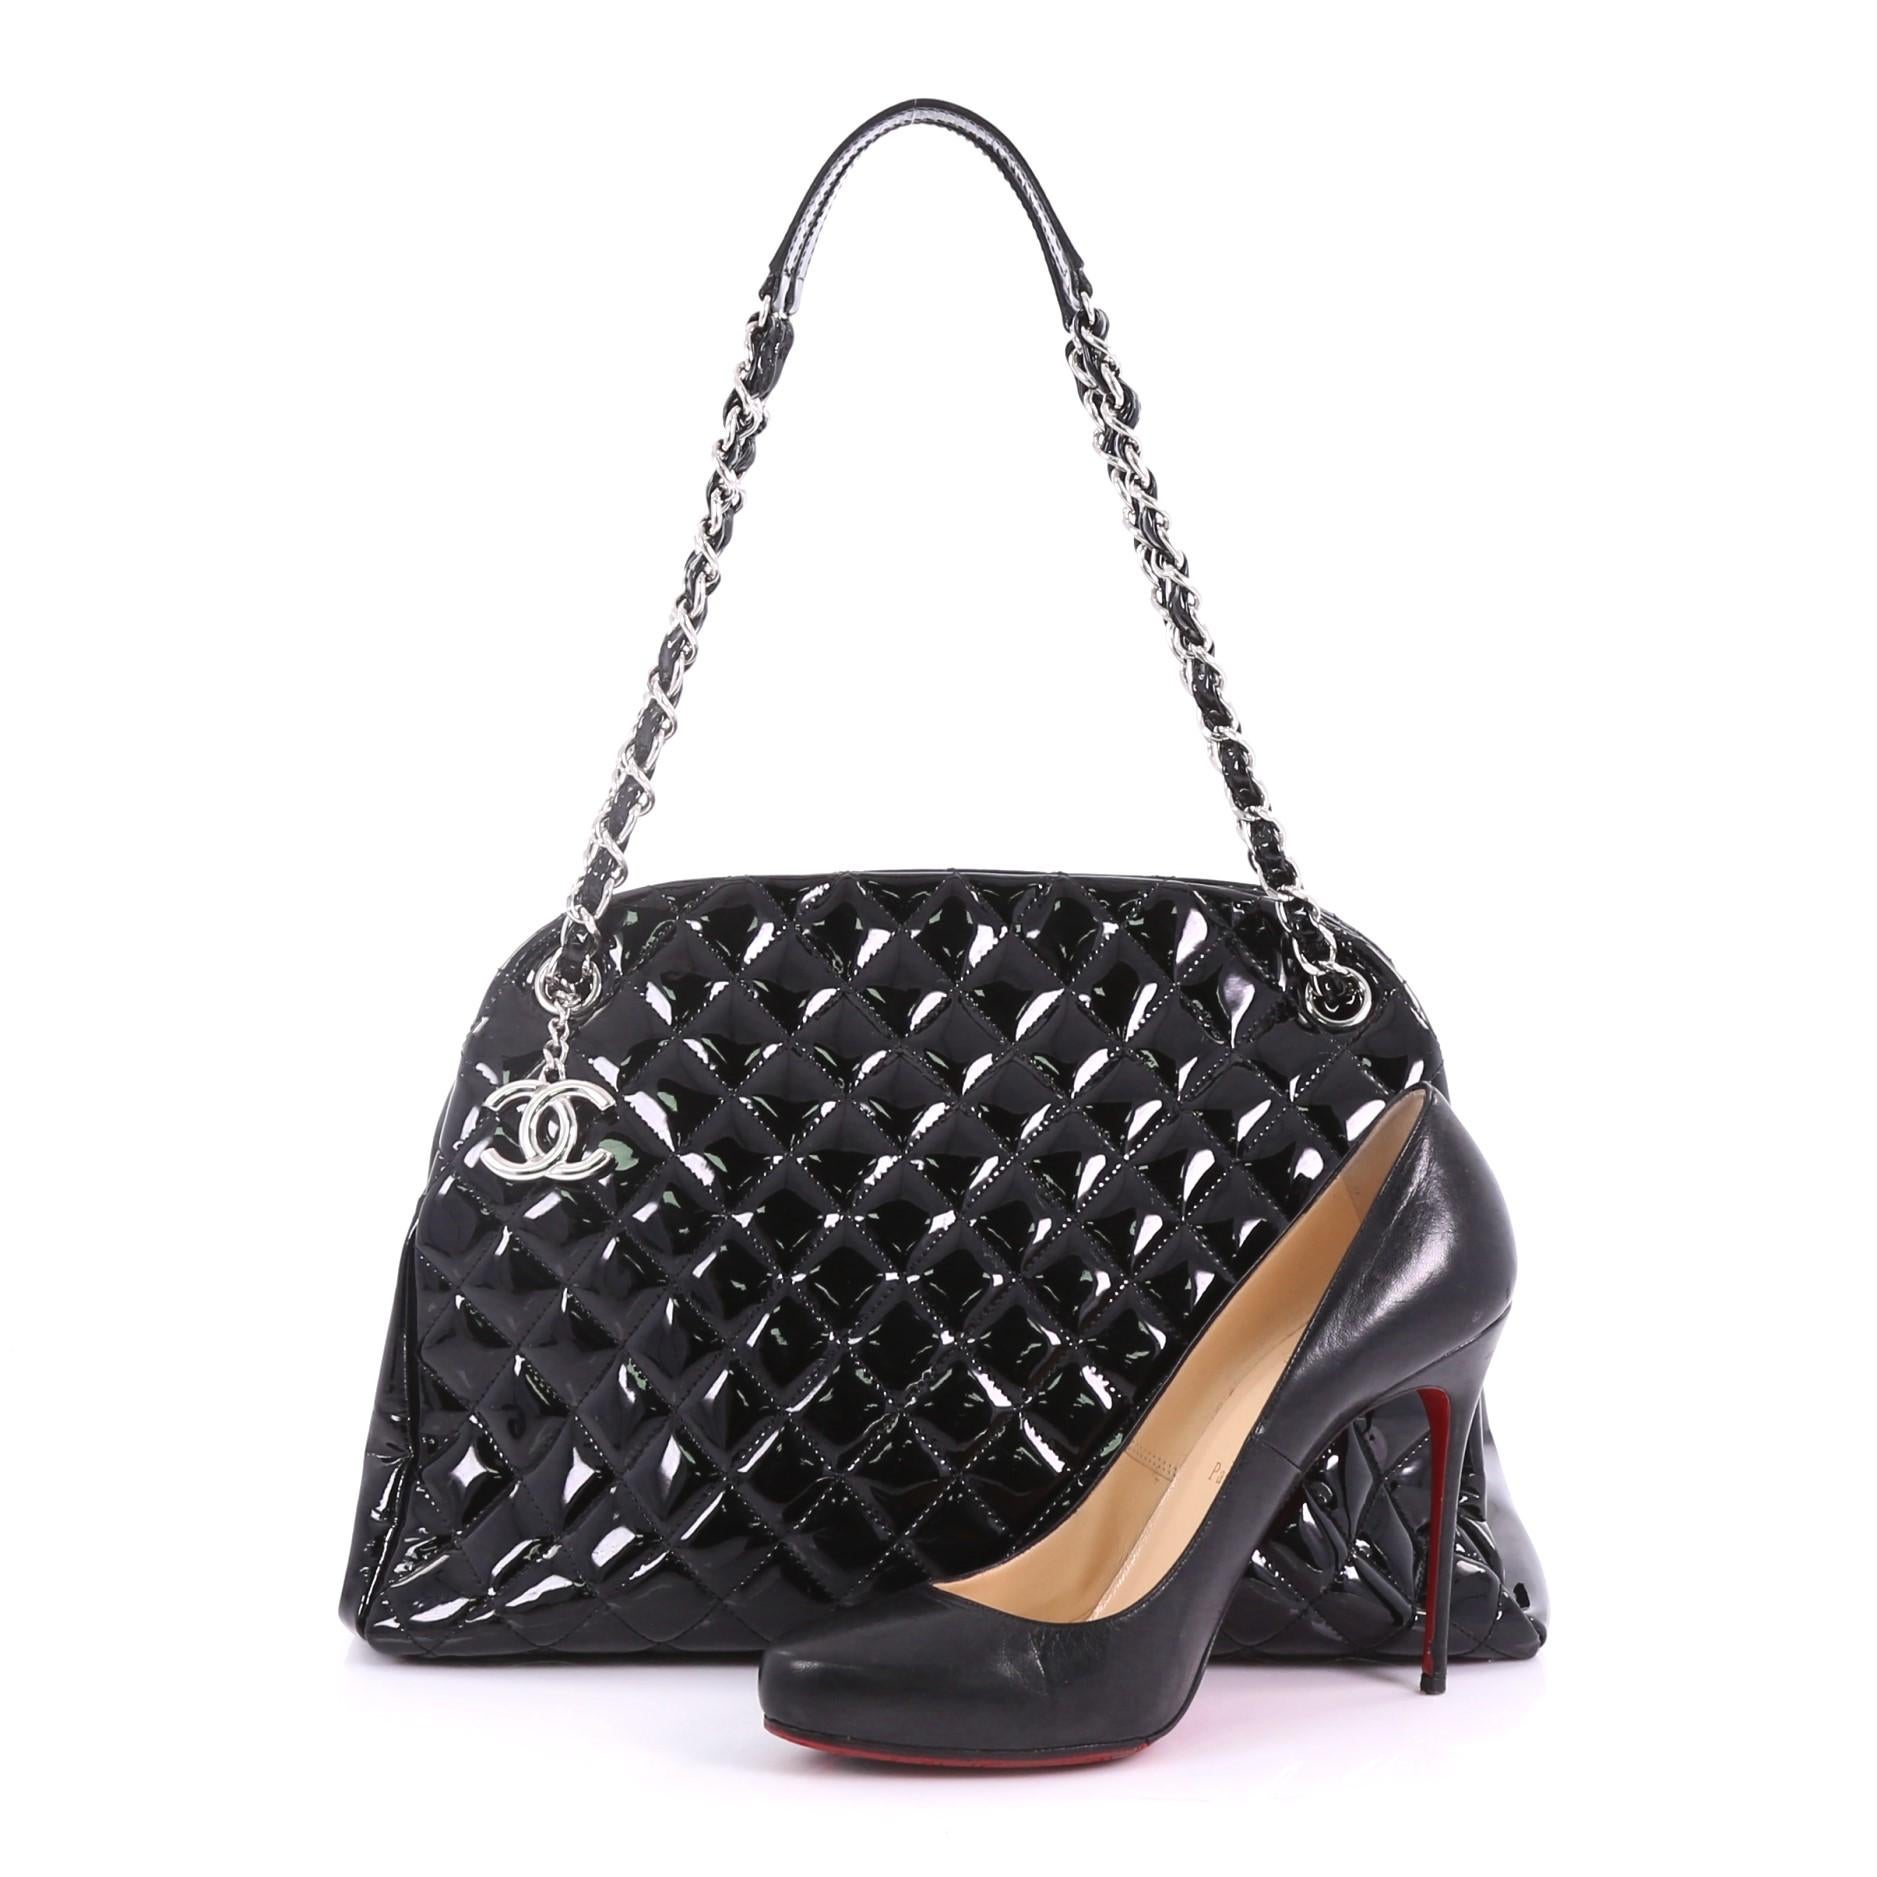 This Chanel Just Mademoiselle Handbag Quilted Patent Large, crafted in black quilted patent leather, features dual woven in leather chain link straps, and silver-tone hardware. Its top magnetic snap closure opens to a black fabric interior with